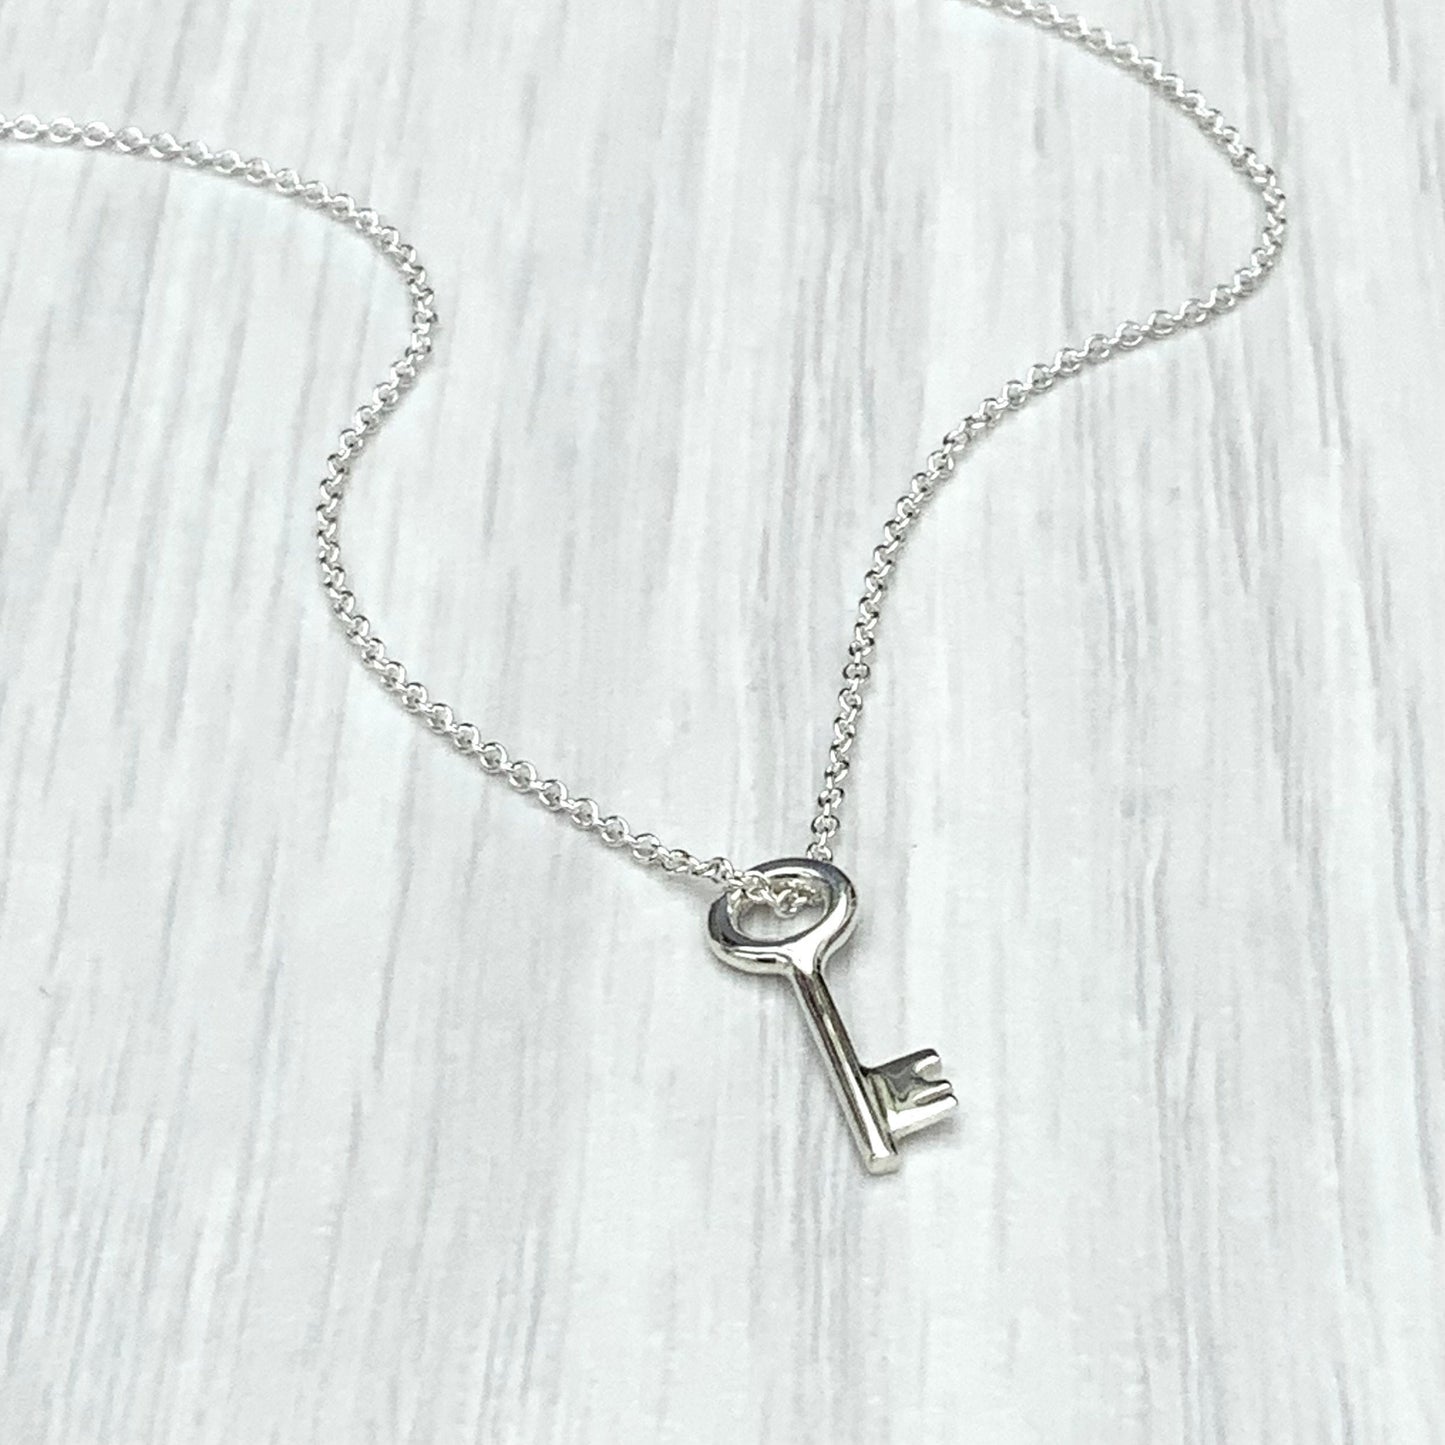 Solid silver small and dainty key charm pendants on a trace chain. A choice of one, two or three key pendants.